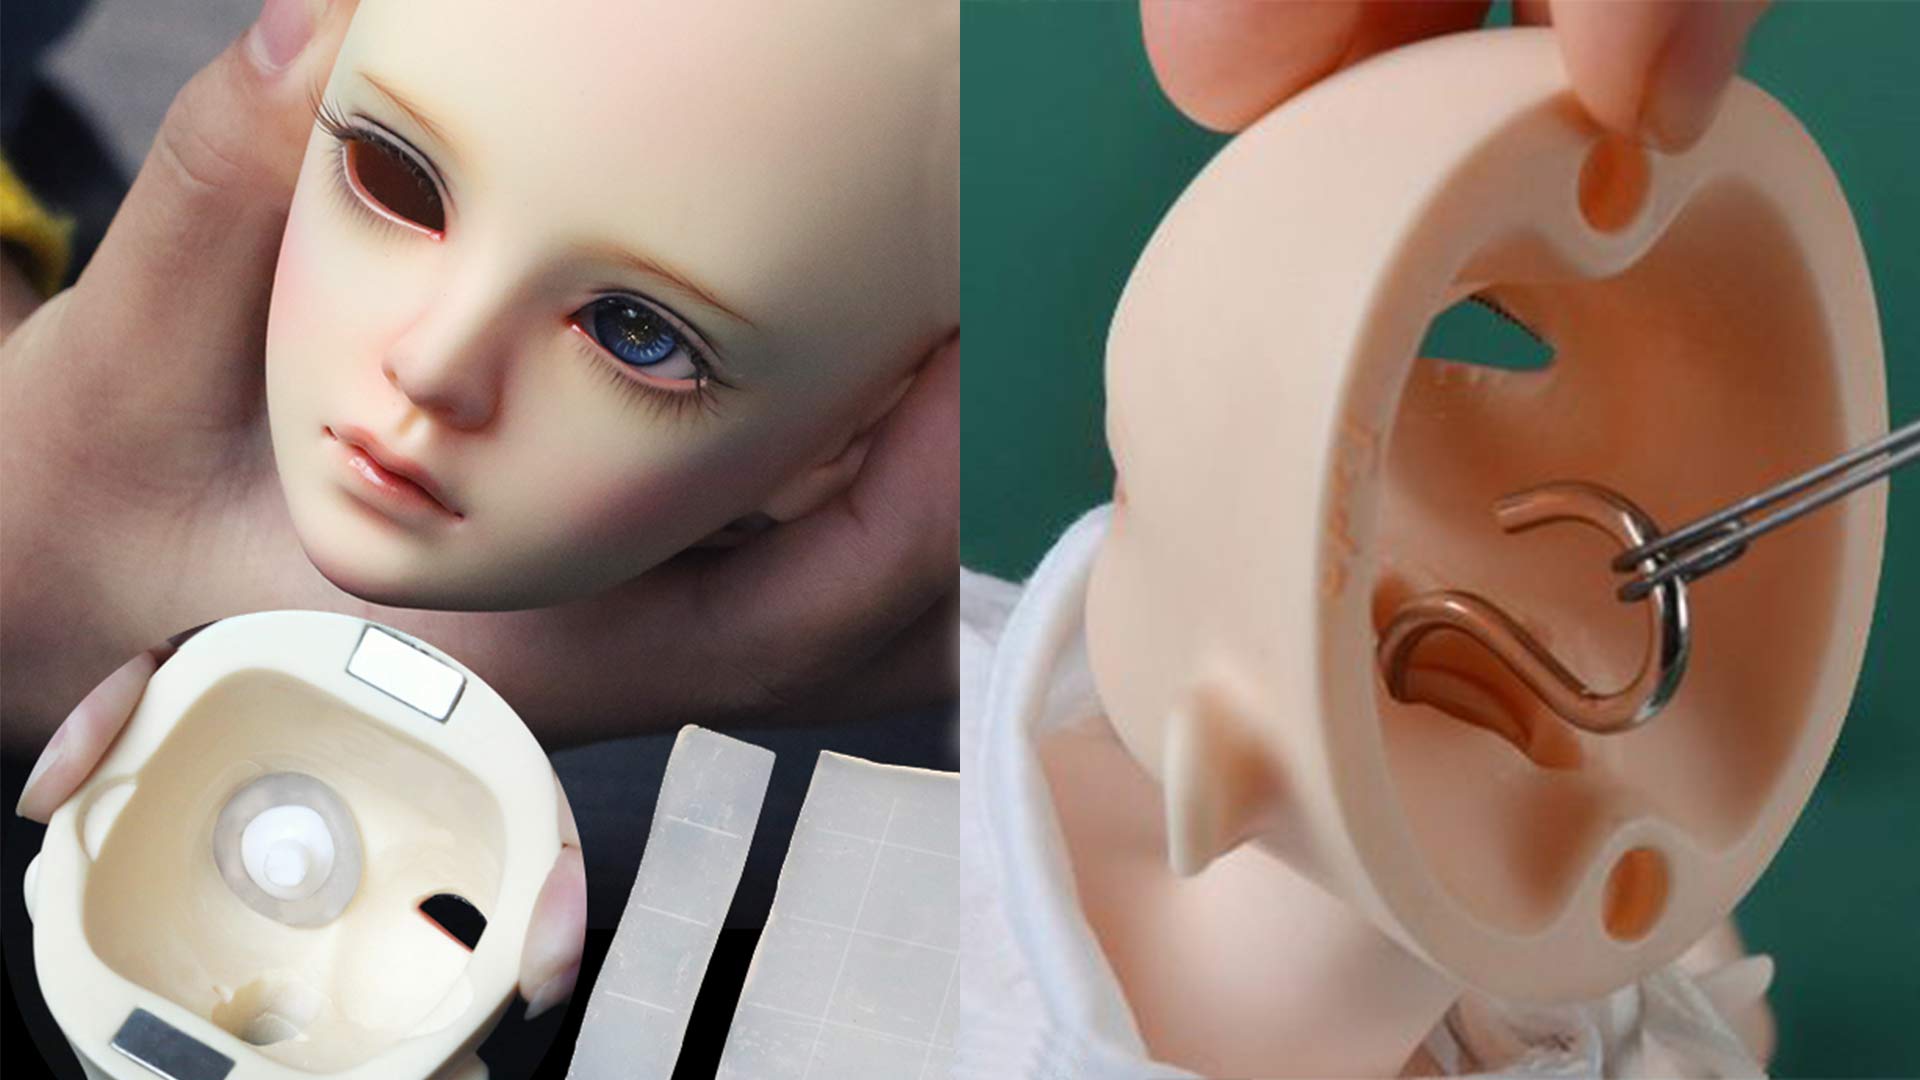 Ball-Jointed-Doll-Maintenance-How-to-Clean-and-Care-for-Your-Dolls